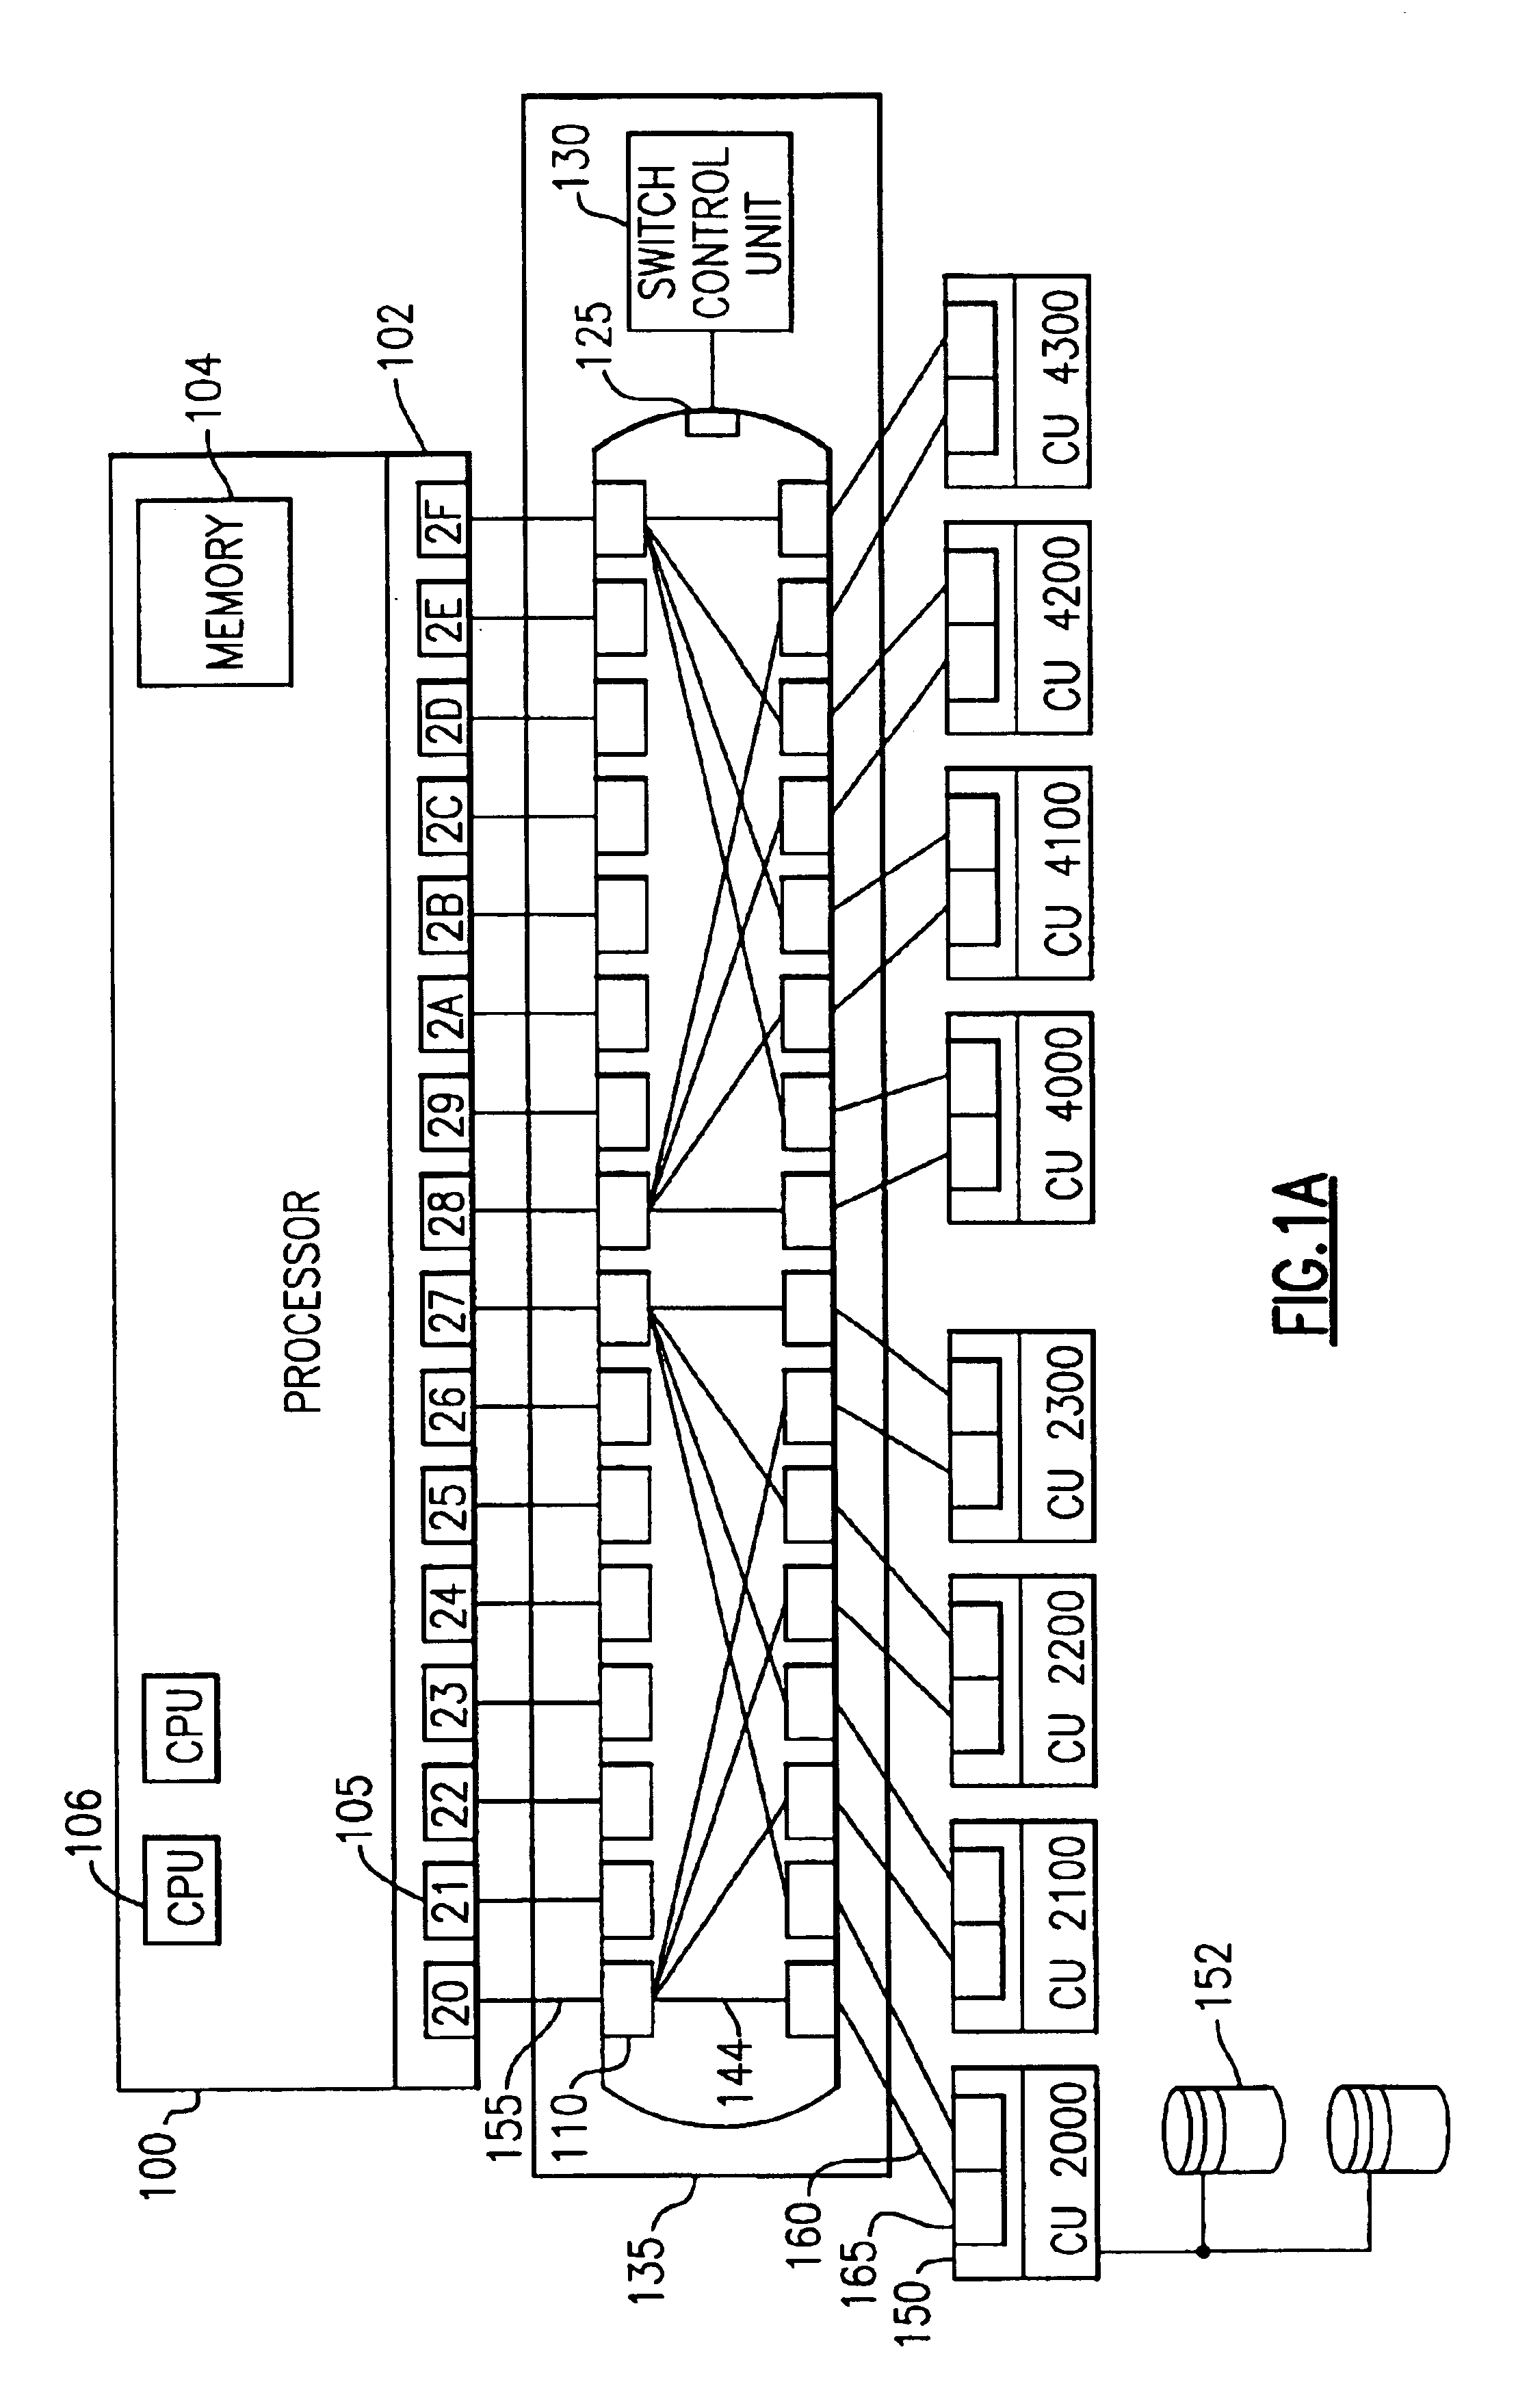 Method, apparatus and computer program for informing a requesting device of port configuration changes in a computer network switching device